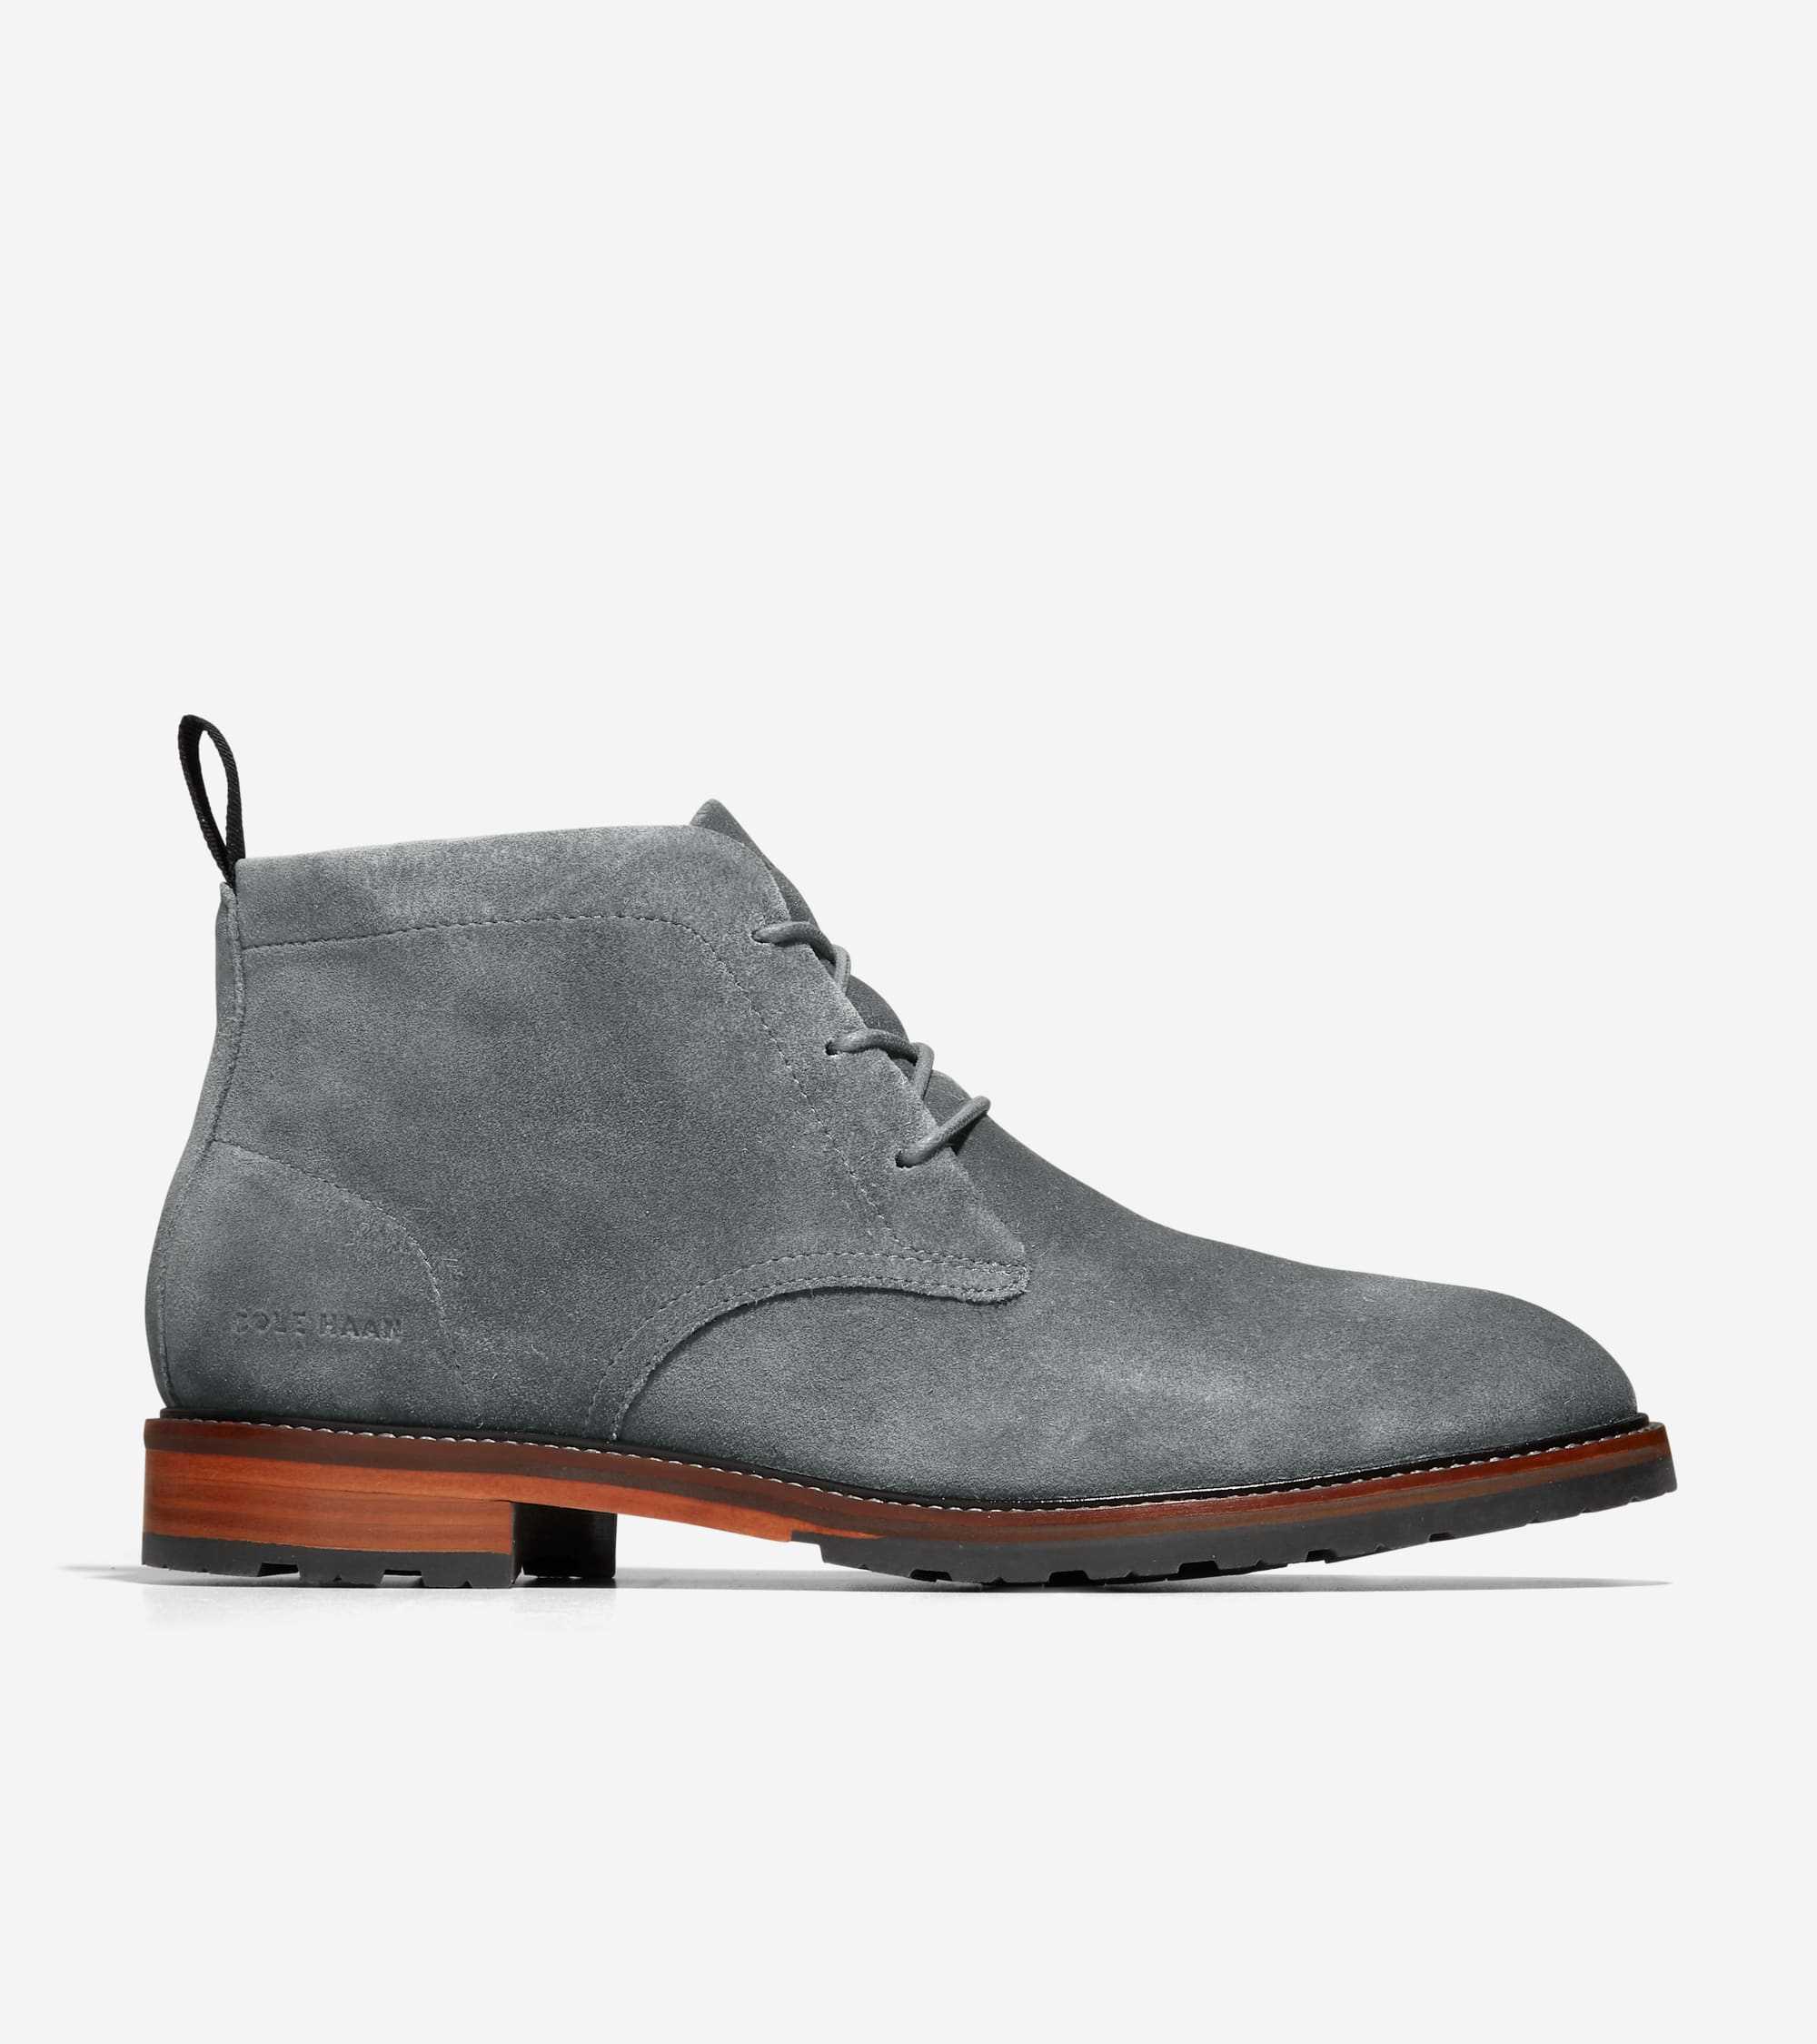 Cole Haan Men's Berkshire Lug Sole Chukka Boots $129.95 (reduced from $240.00)